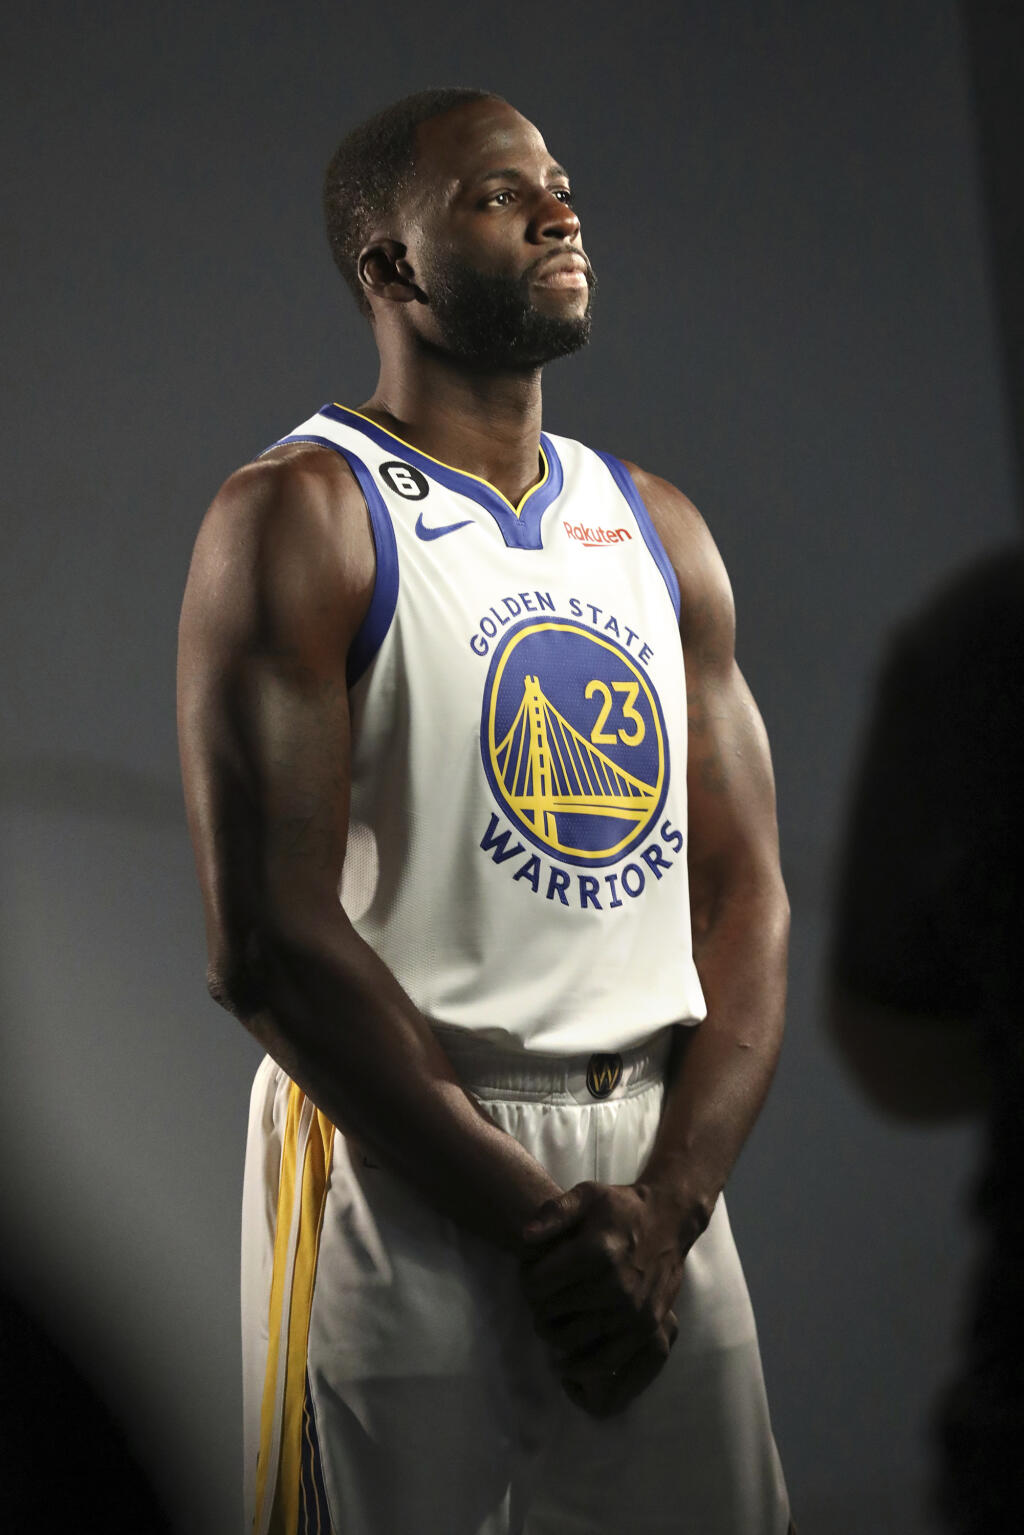 Golden State Warriors' Draymond Green during Media Day at Chase Center in San Francisco, Sunday, Sept. 25, 2022. (Scott Strazzante/San Francisco Chronicle via AP)